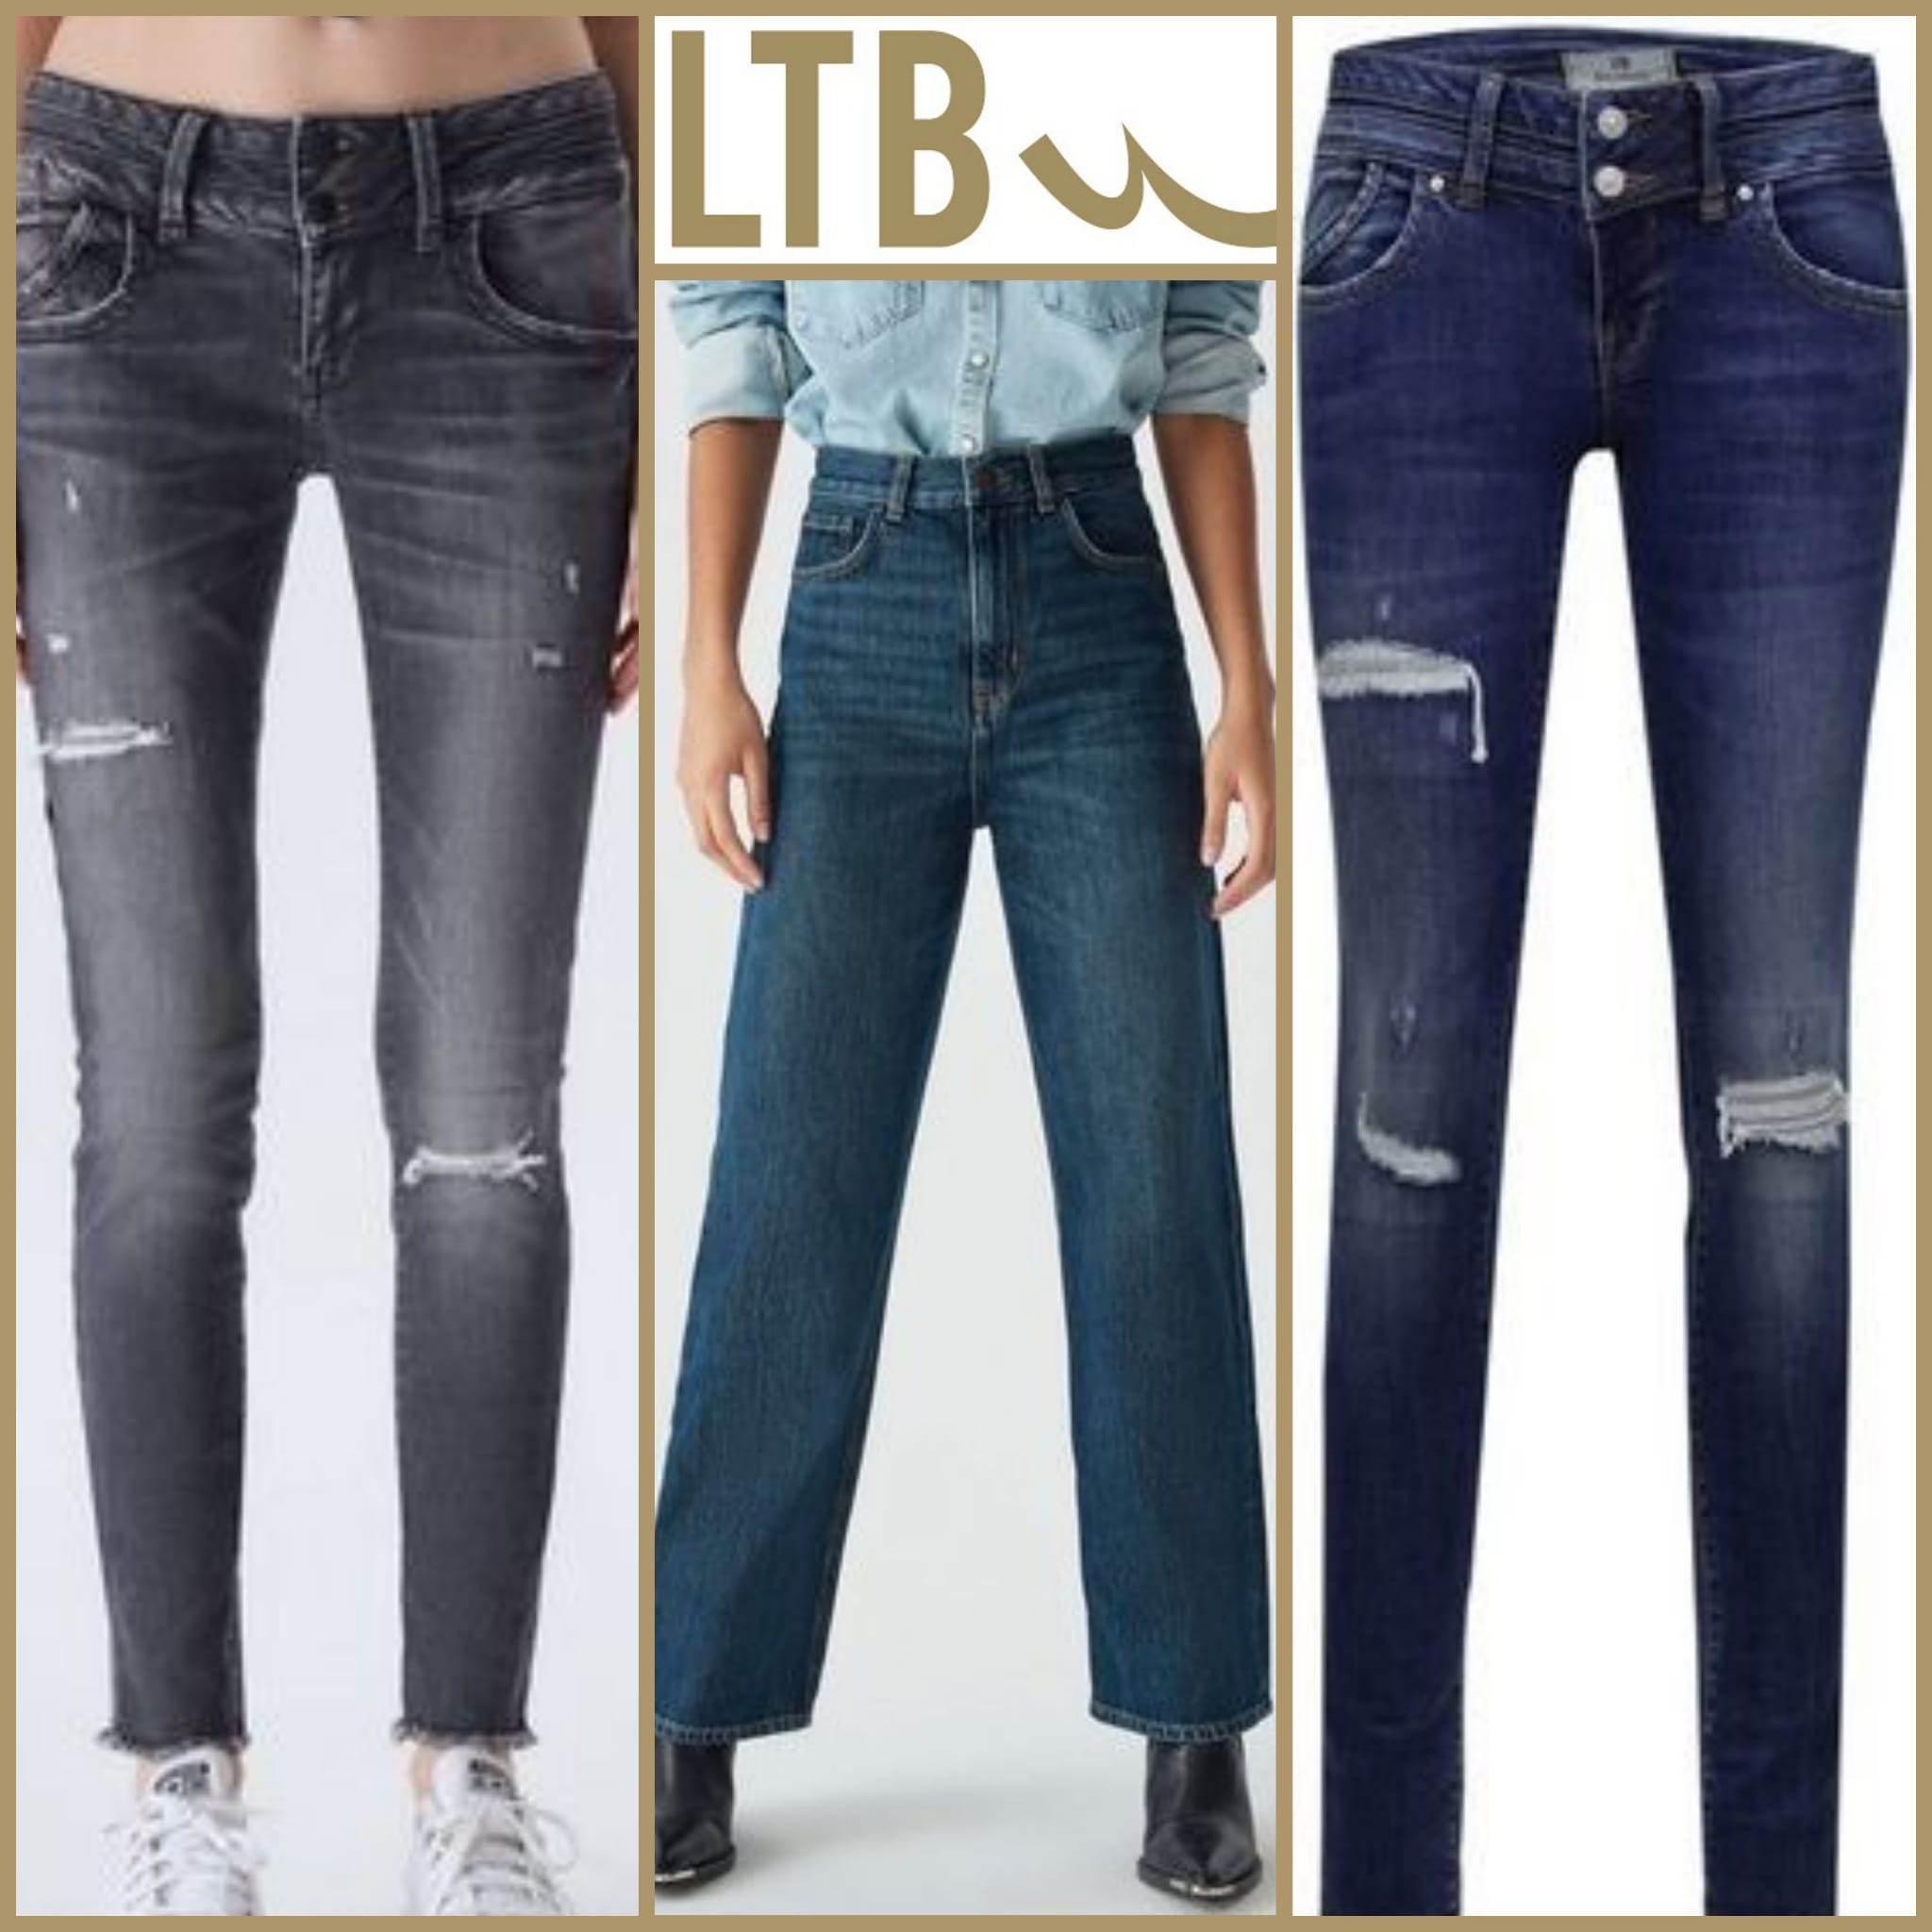 Women's jeans from LTB